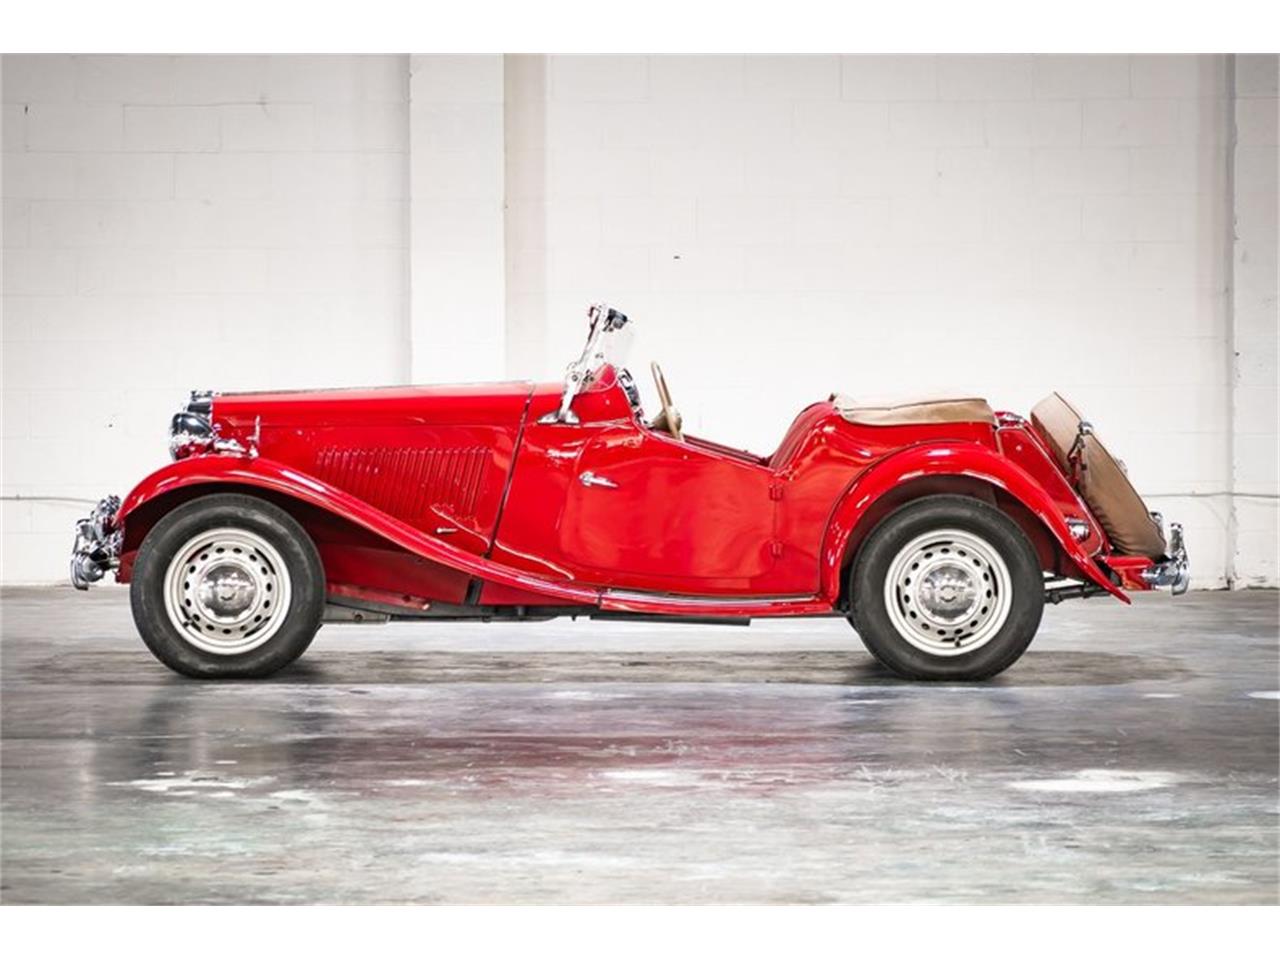 For Sale at Auction: 1953 MG TD for sale in Brandon, MS